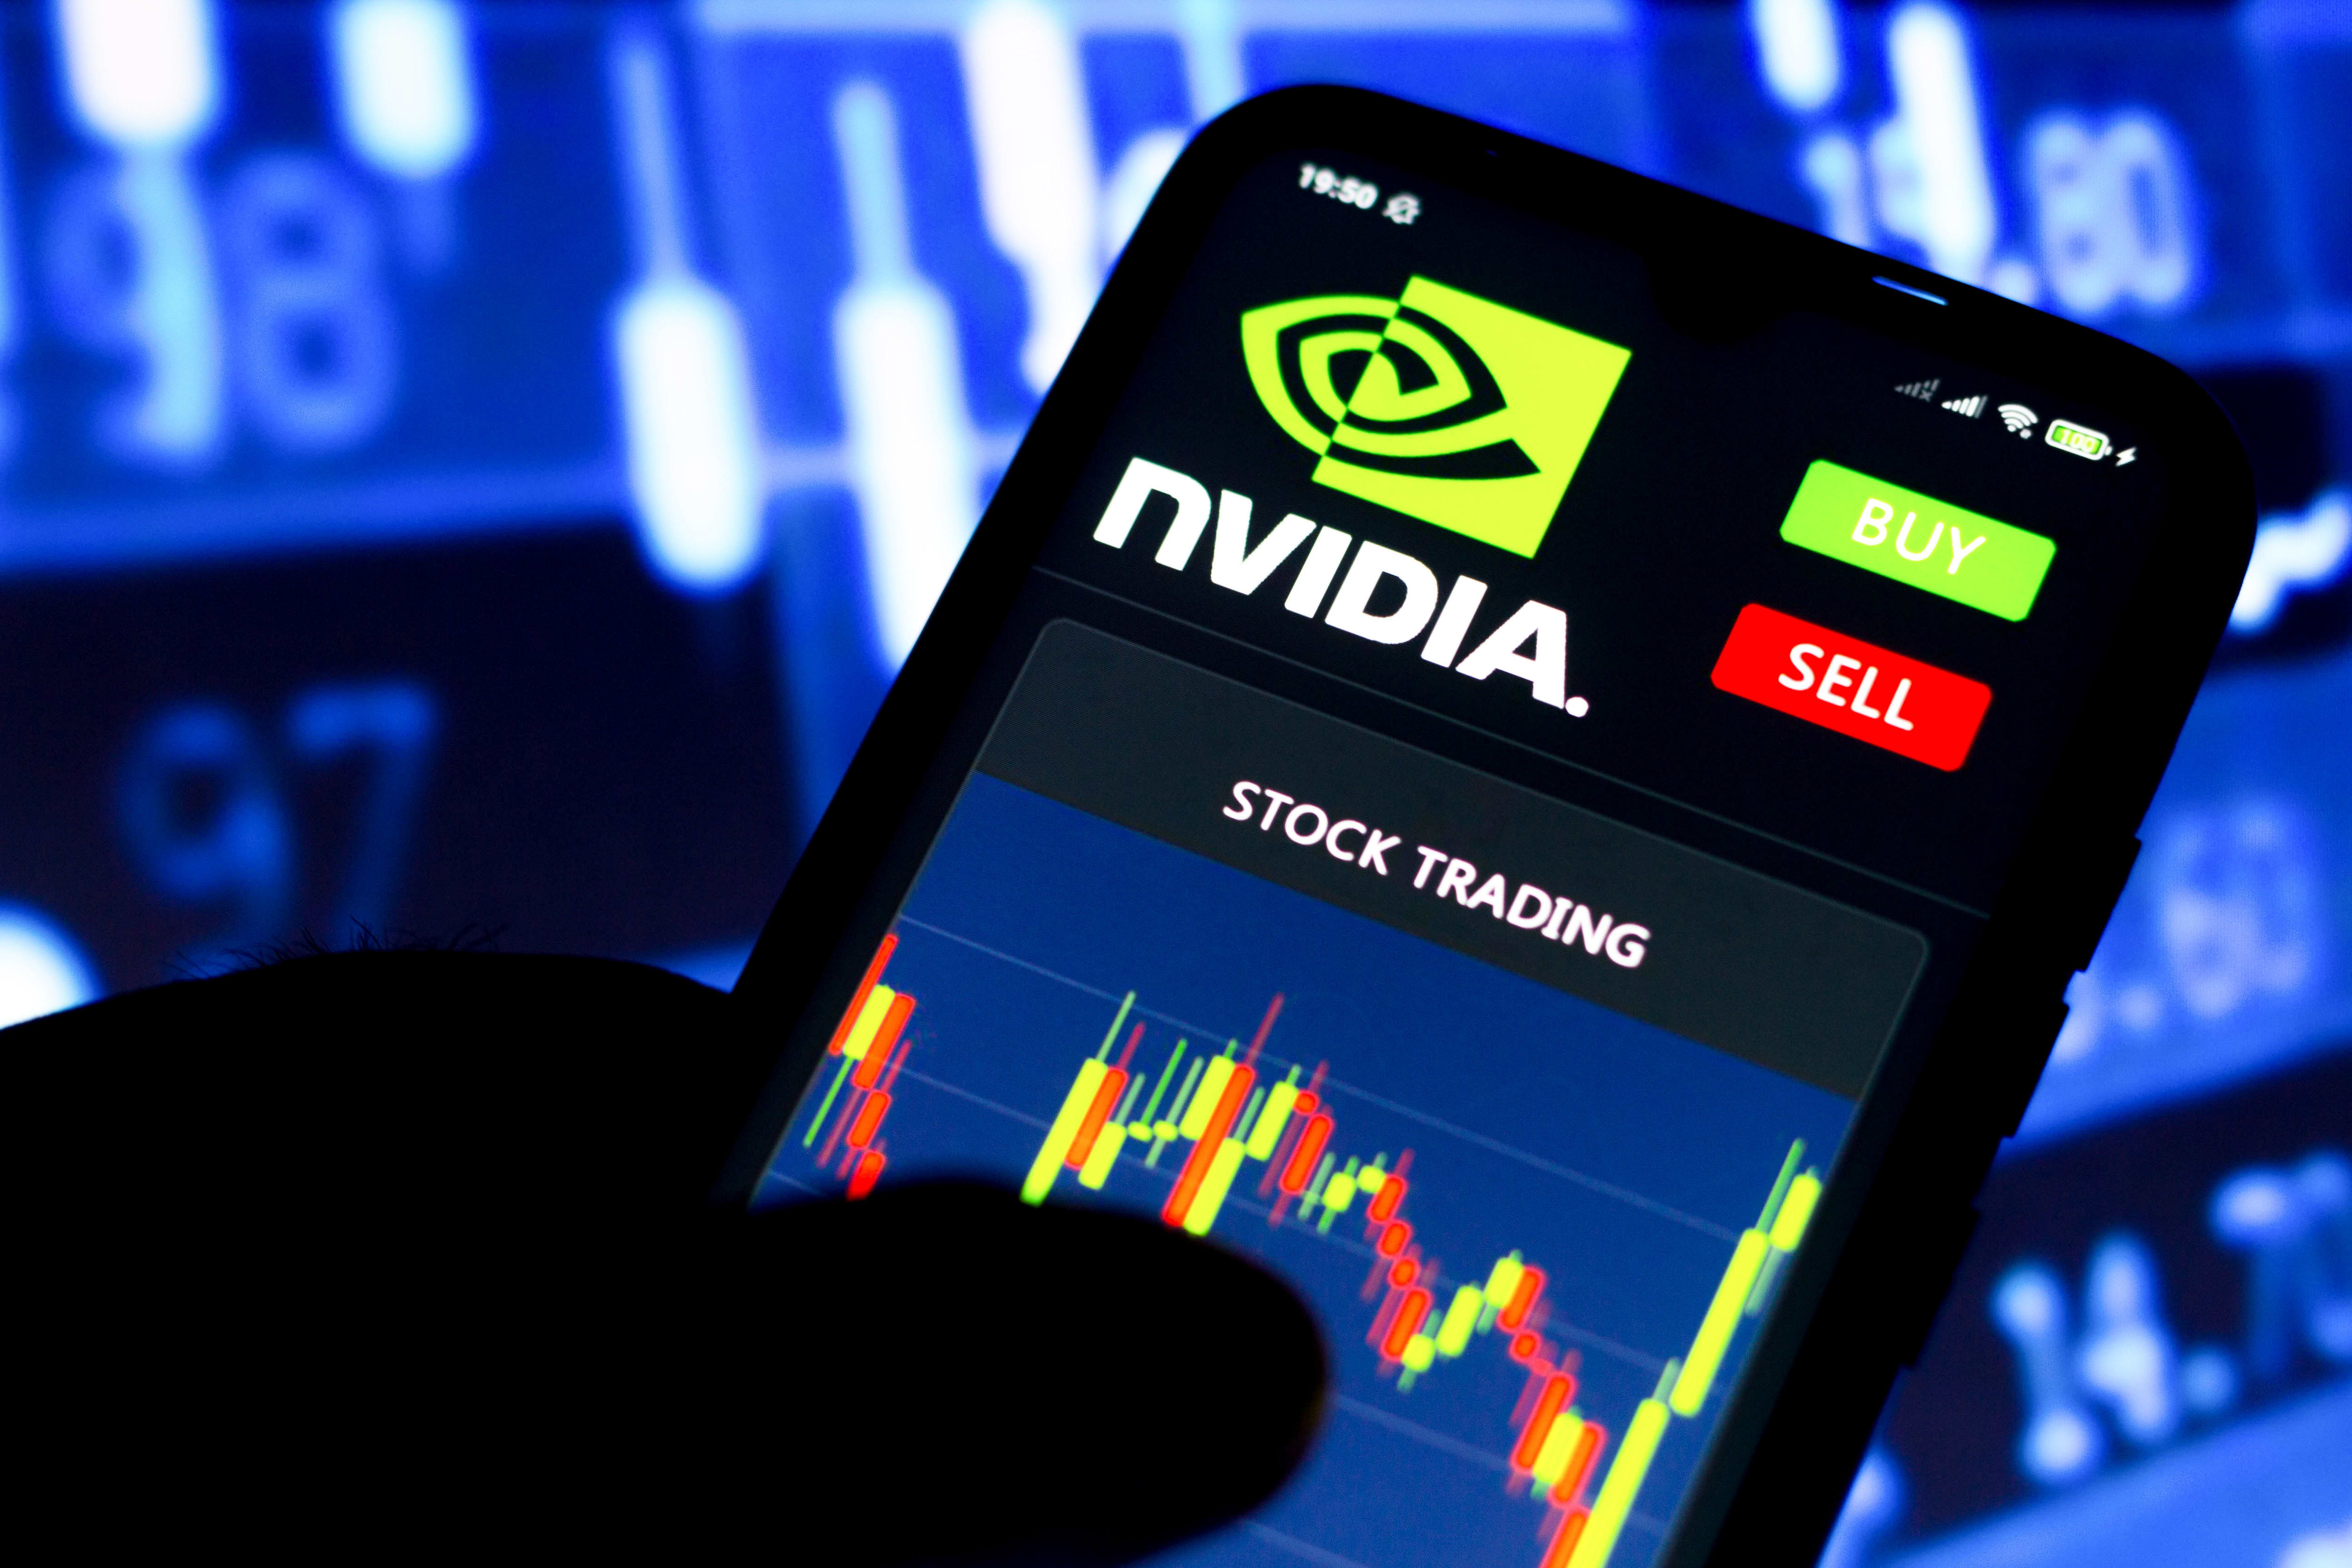 Nvidia is worth nearly $1 trillion—what to know before investing